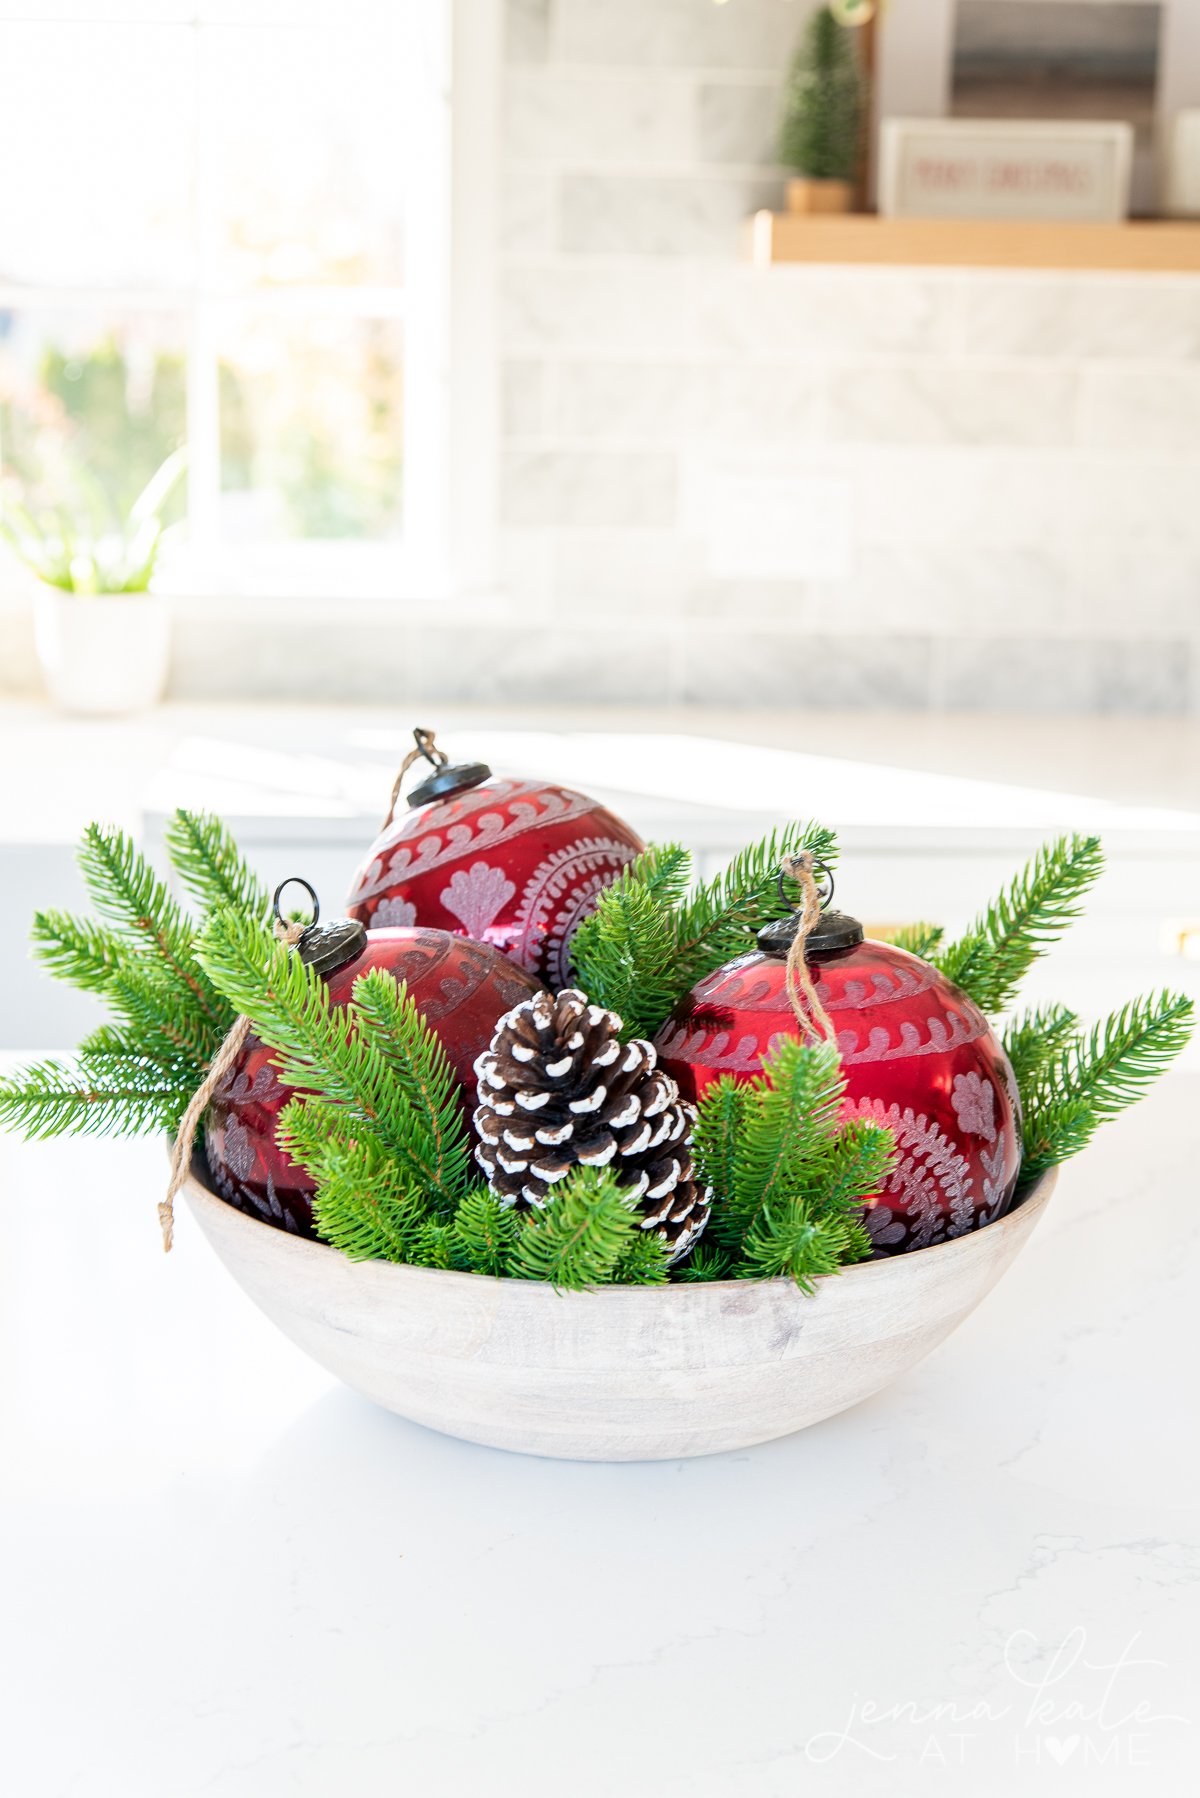 festive centerpiece filled with red glass ornaments and pinecones on a kitchen island